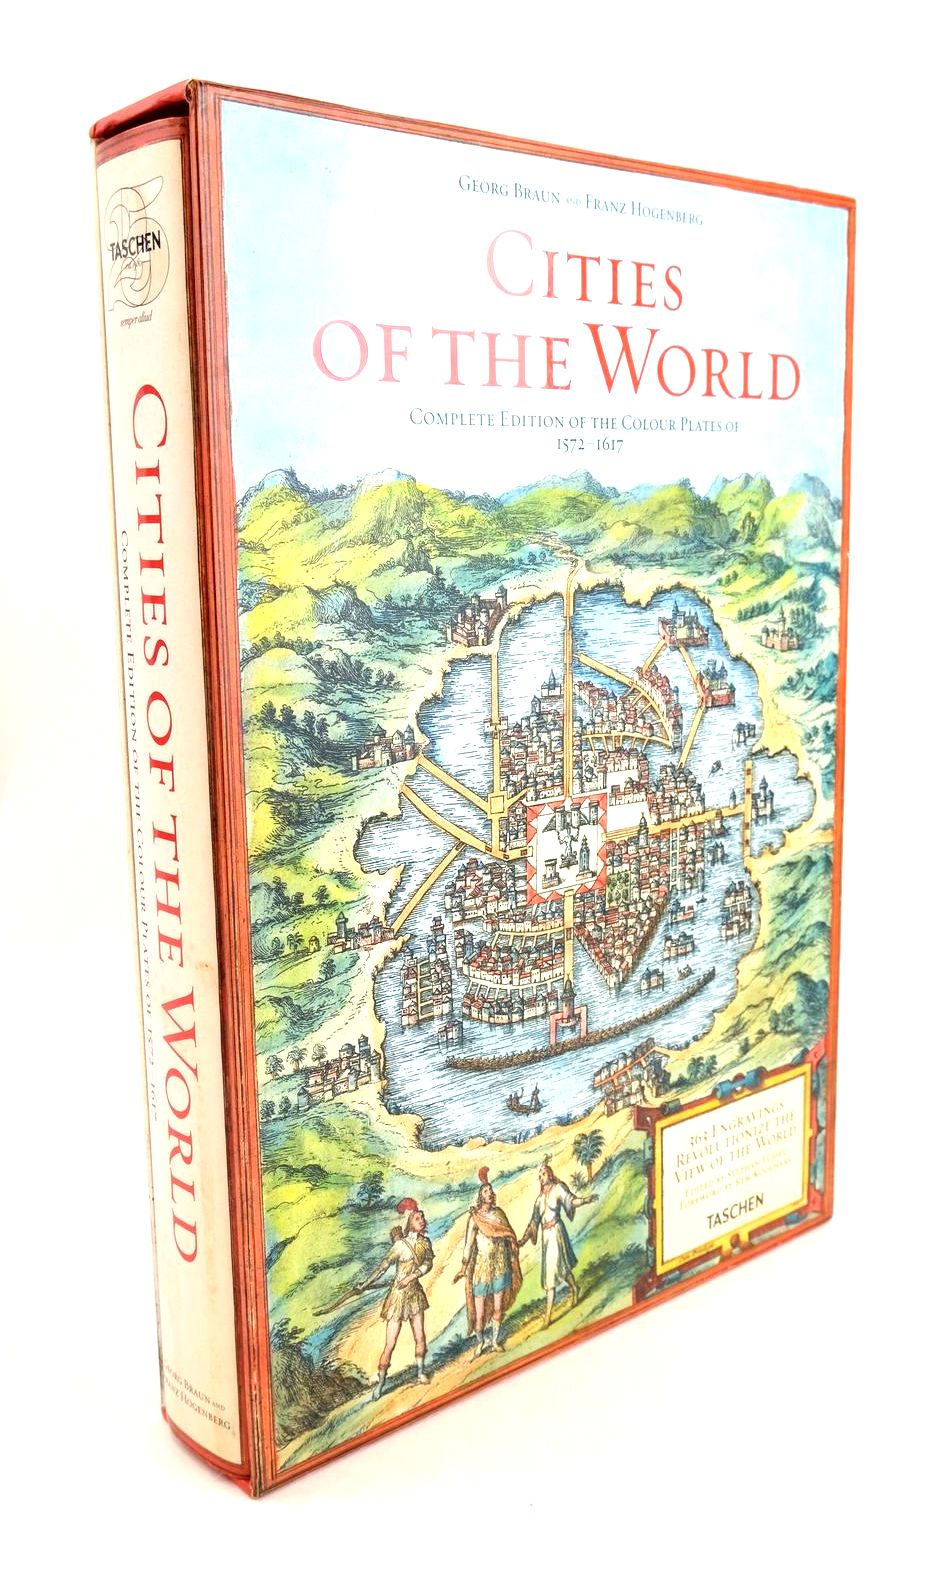 Photo of CITIES OF THE WORLD: 363 ENGRAVINGS REVOLUTIONIZE THE VIEW OF THE WORLD written by Braun, Georg Hogenberg, Franz Fussel, Stephan published by Taschen (STOCK CODE: 1327829)  for sale by Stella & Rose's Books